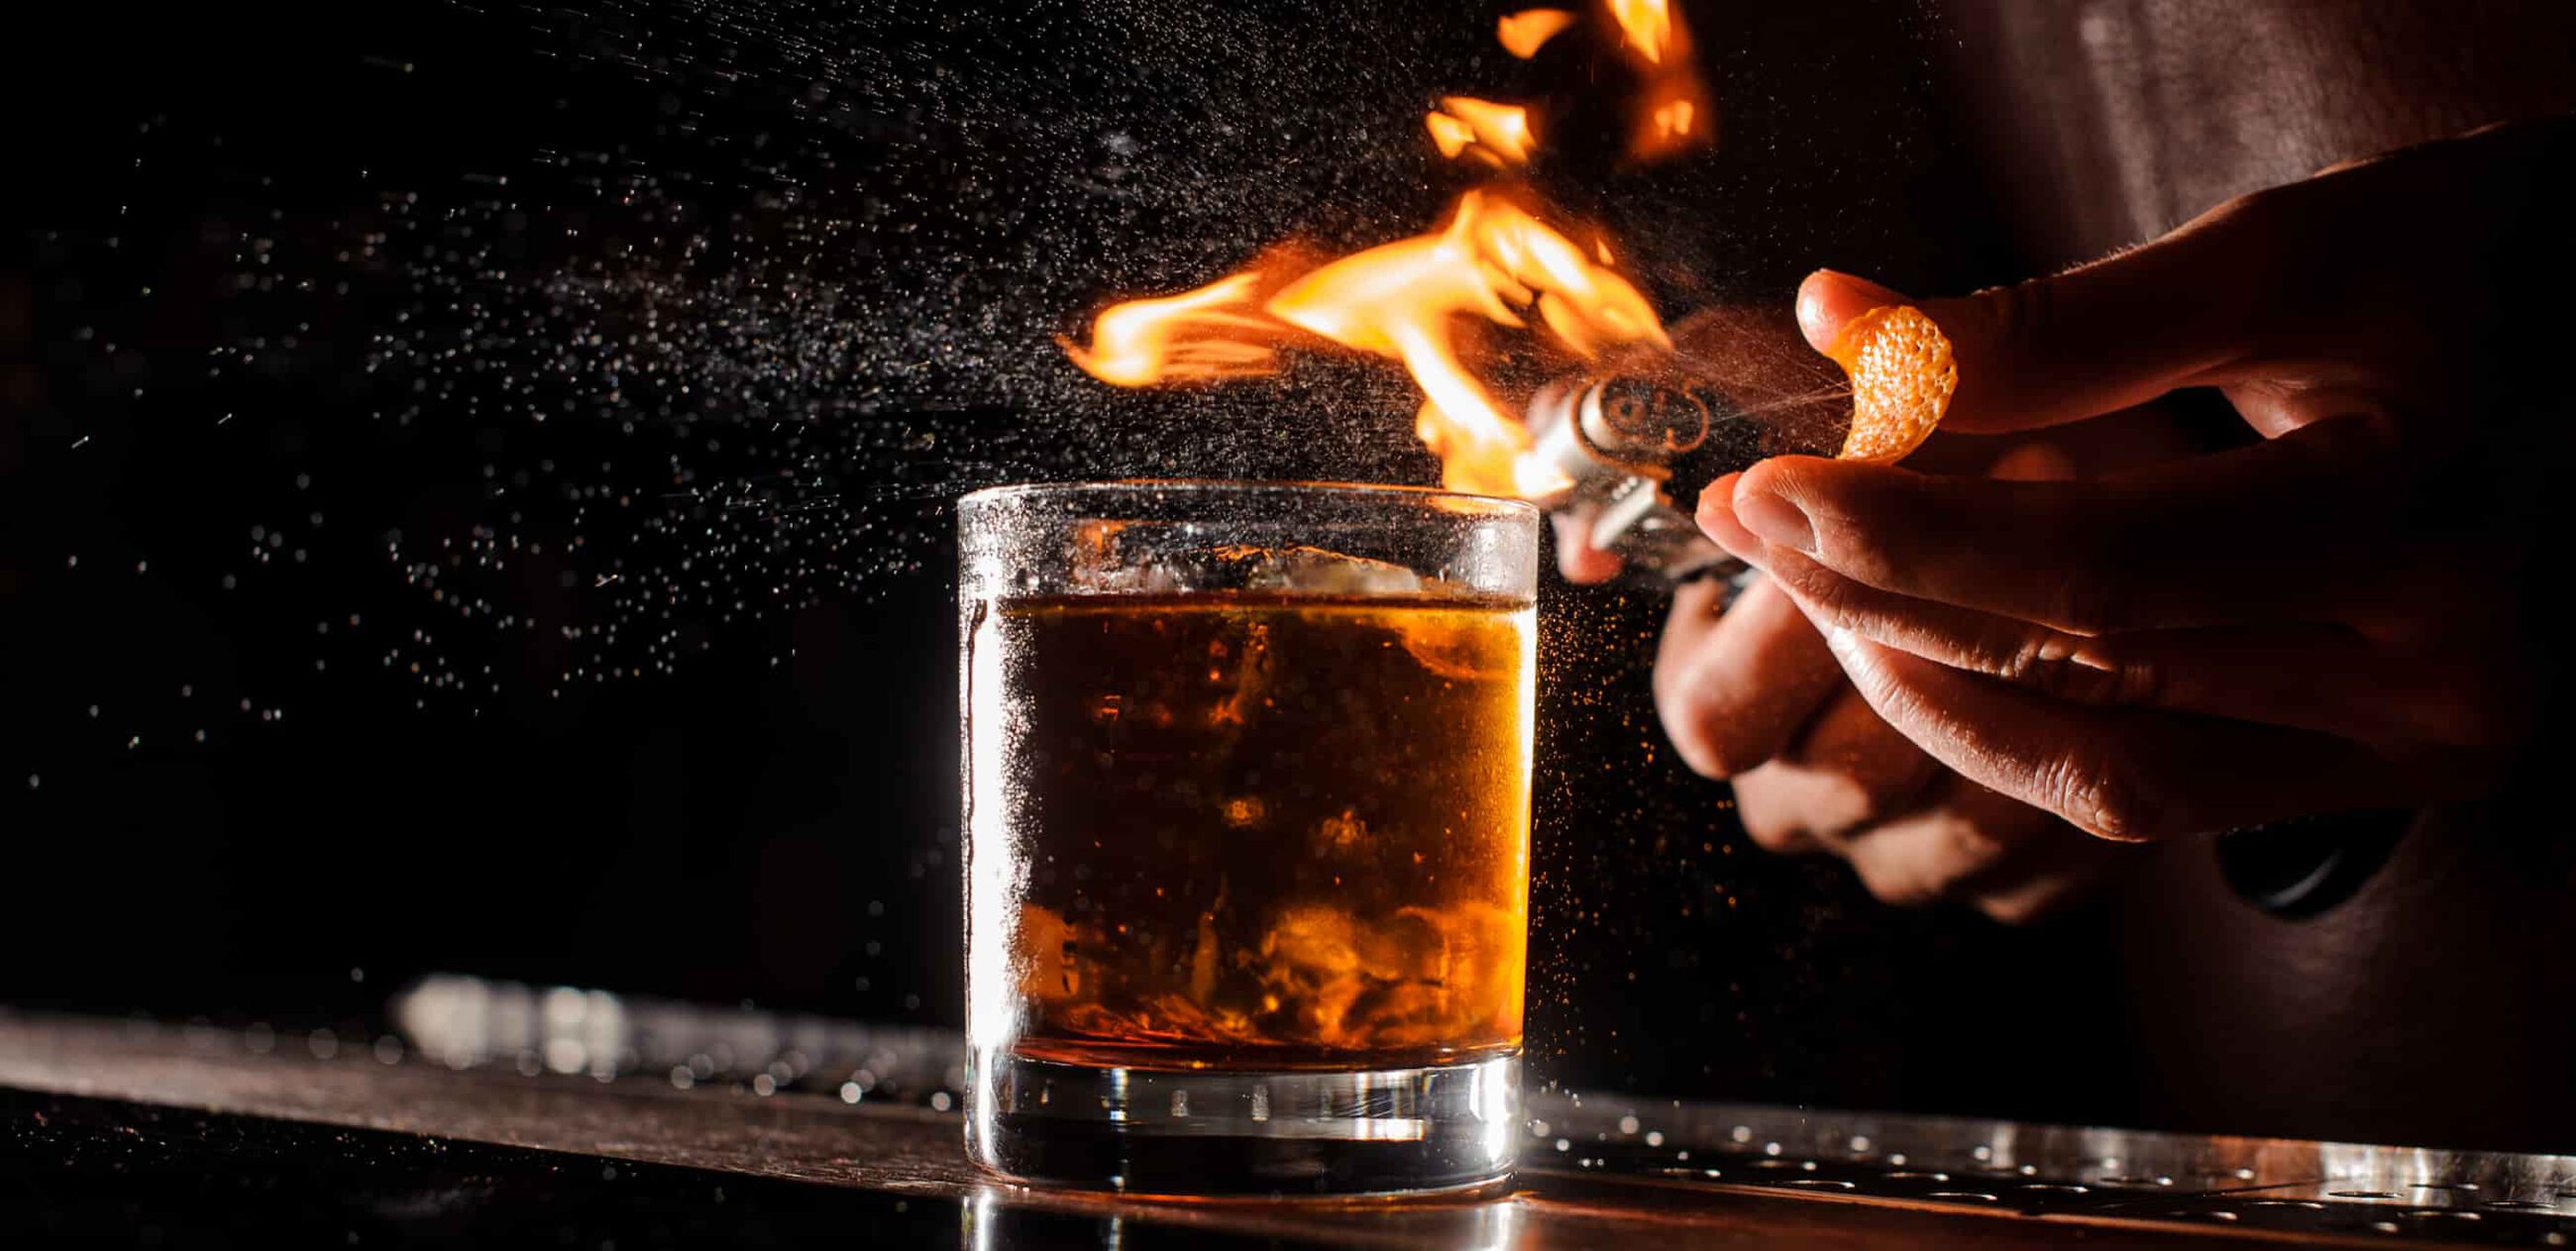 An orange peel is spritzed through a flame over an Old Fashioned